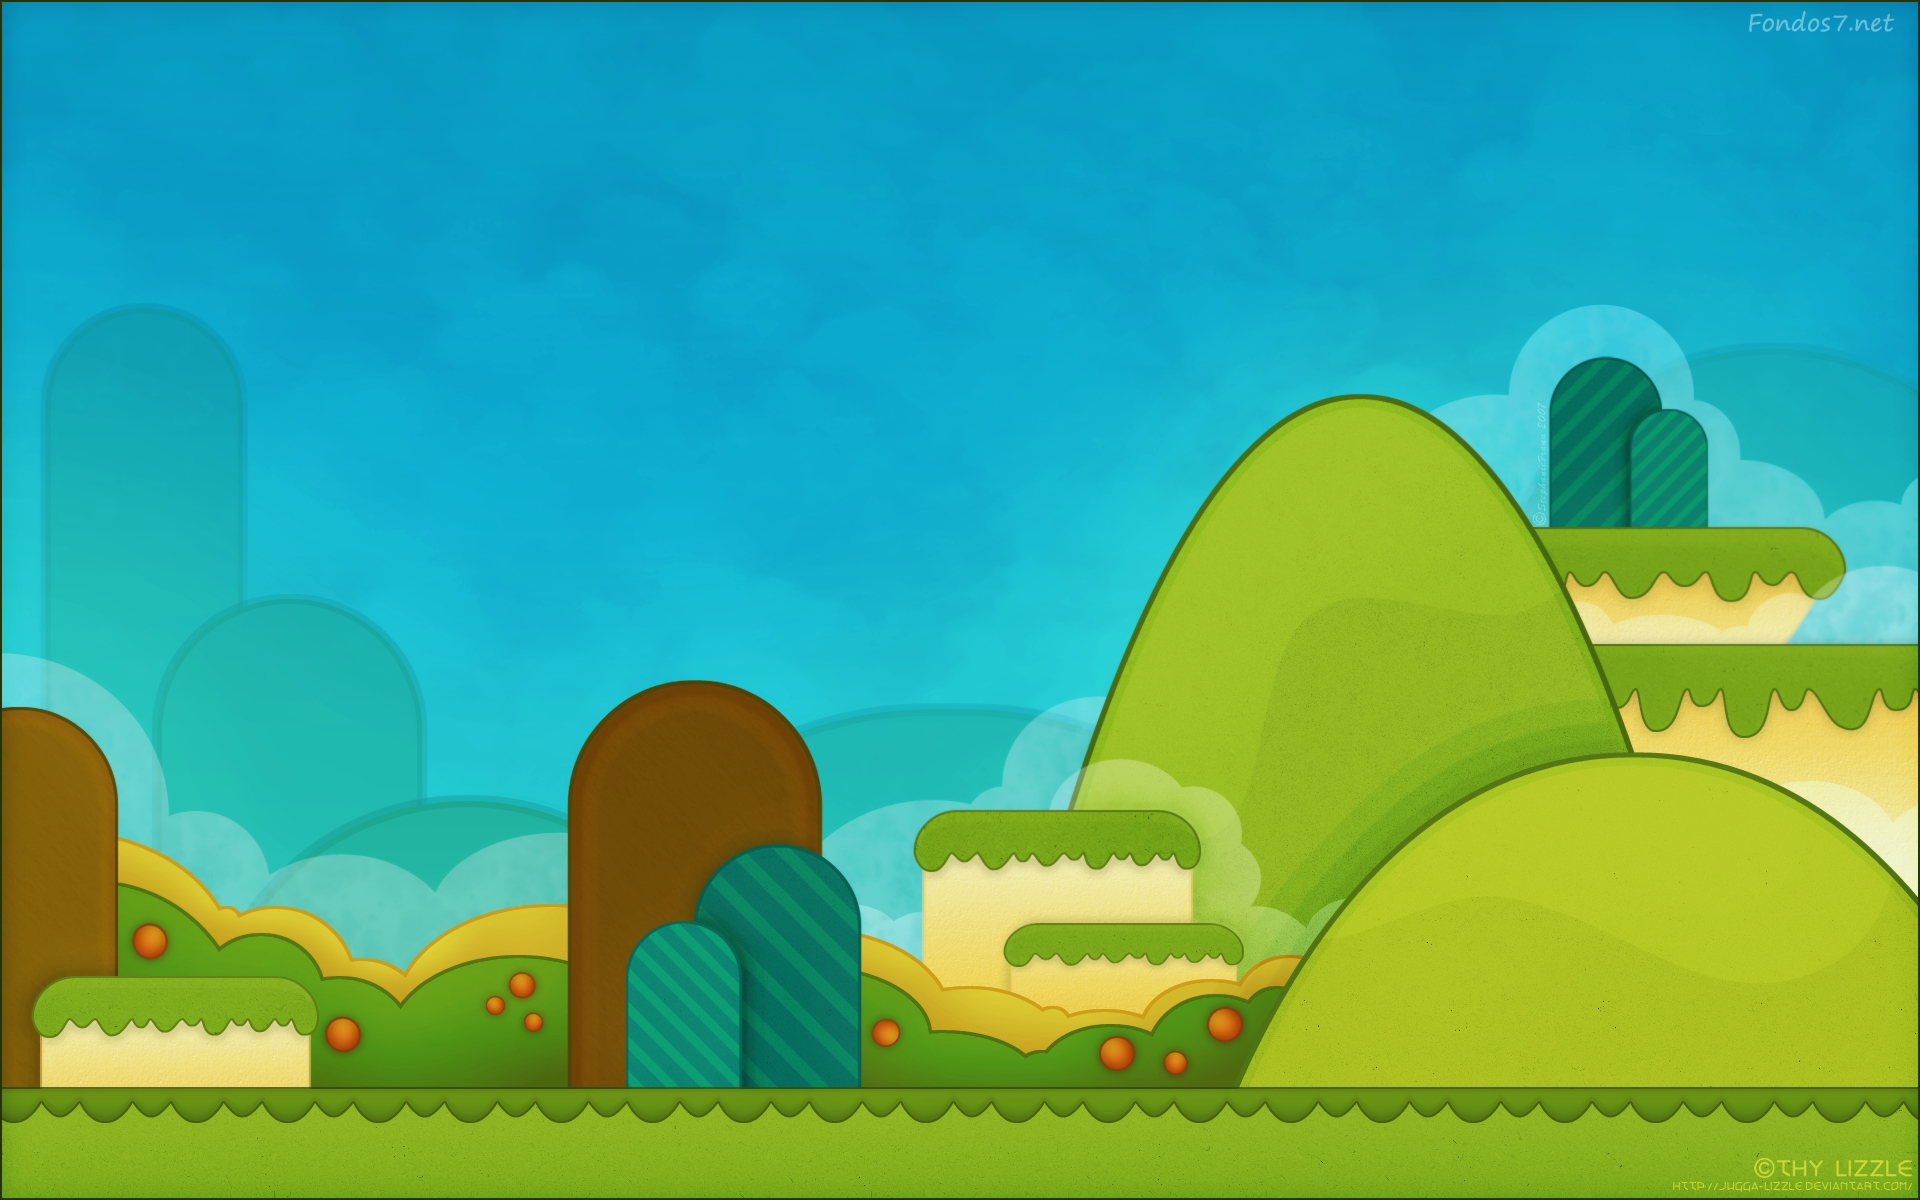 Twitch Background (animated) by shaynahall on DeviantArt